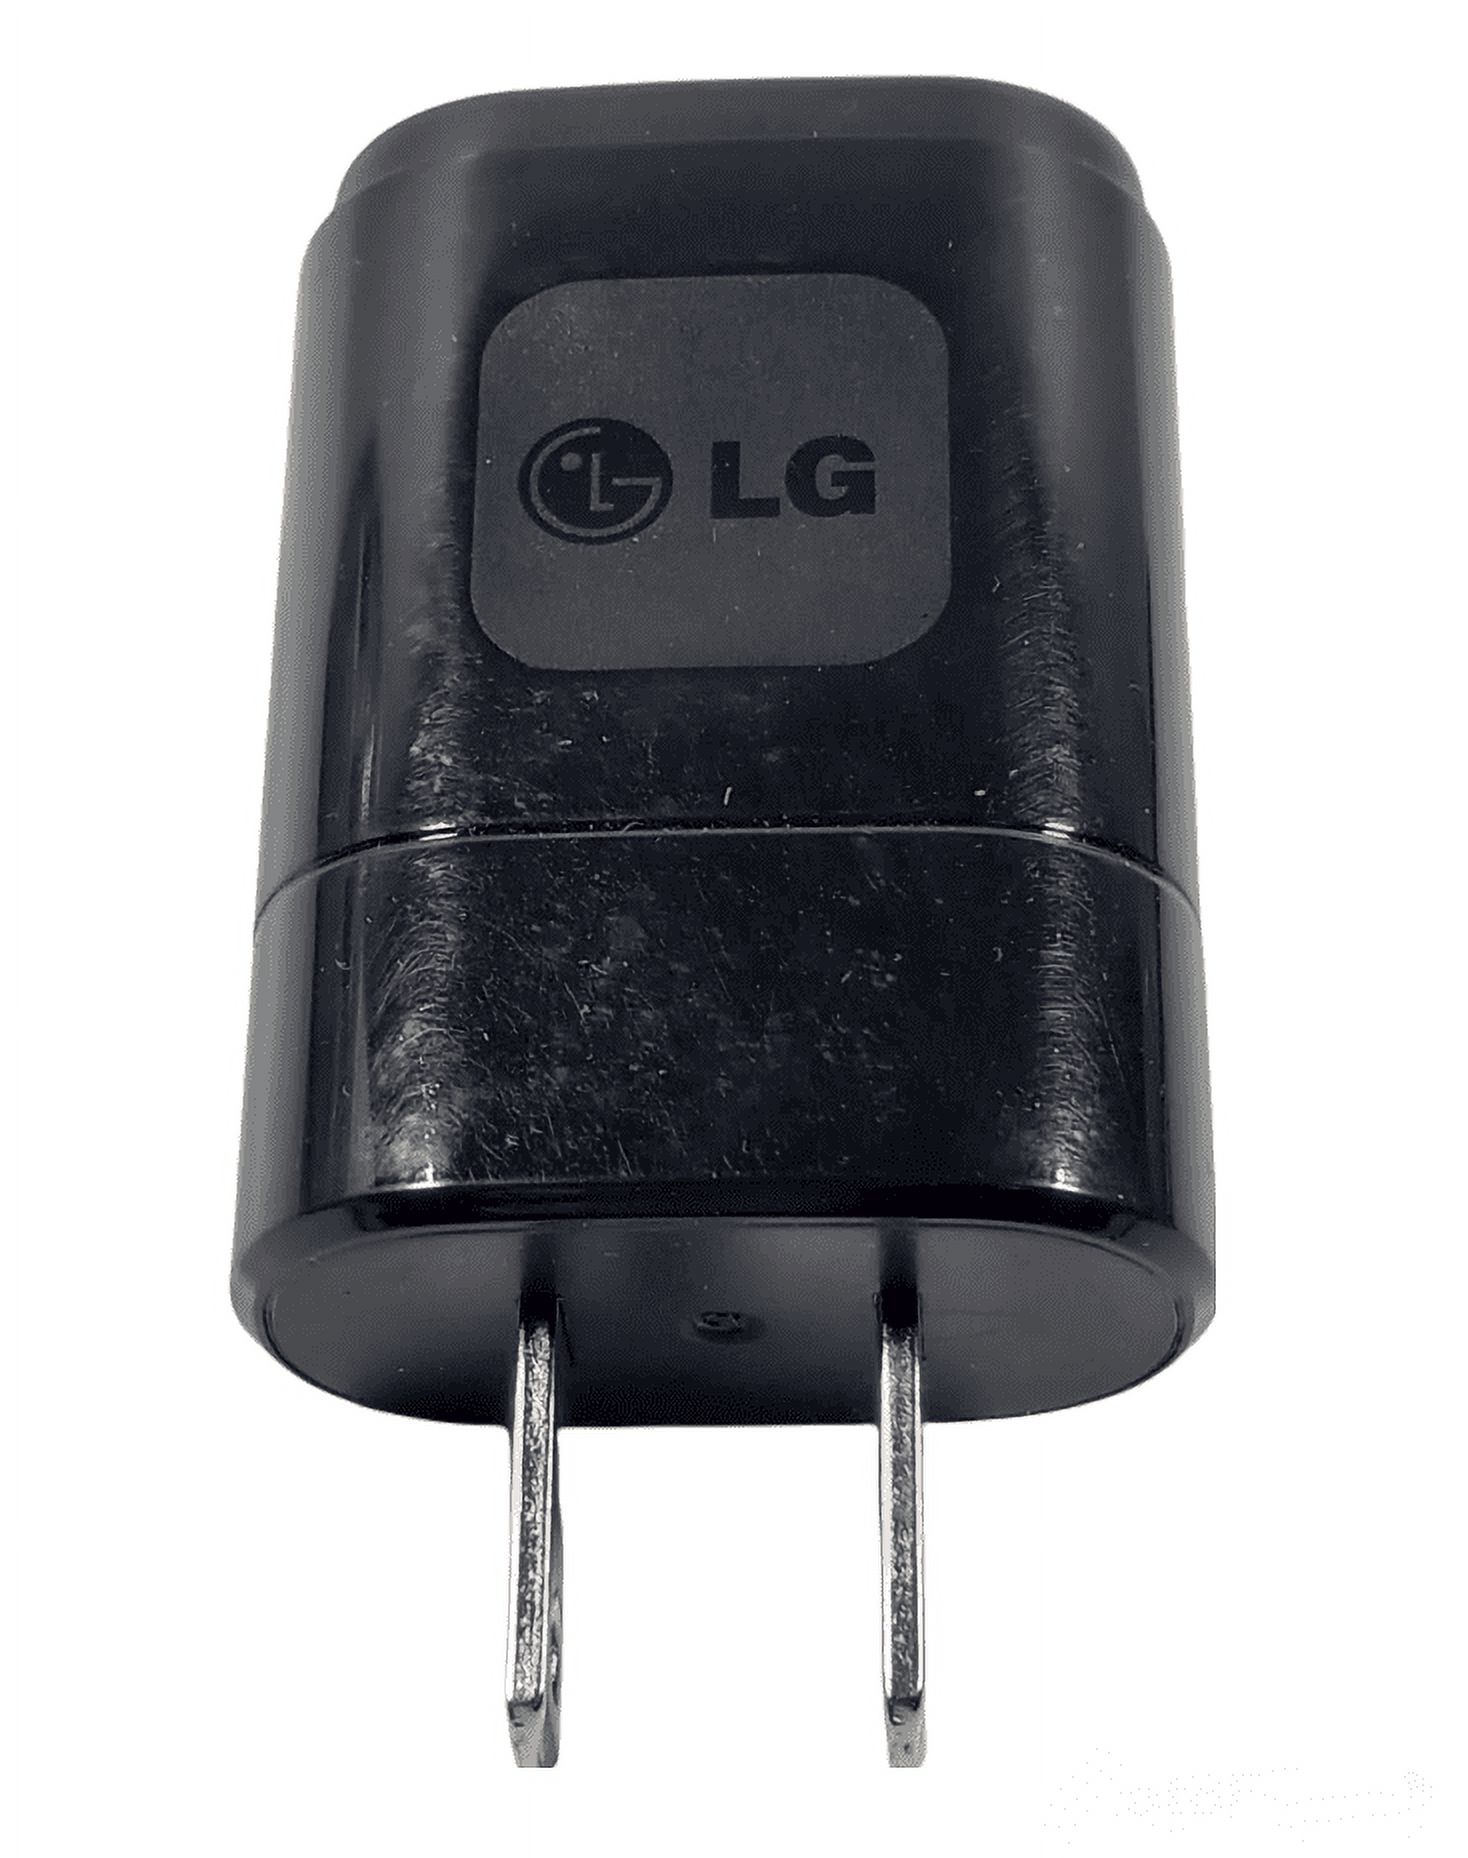 LG Universal USB AC Travel Wall Charger Power Adapter Head MCS-01WR - image 1 of 4